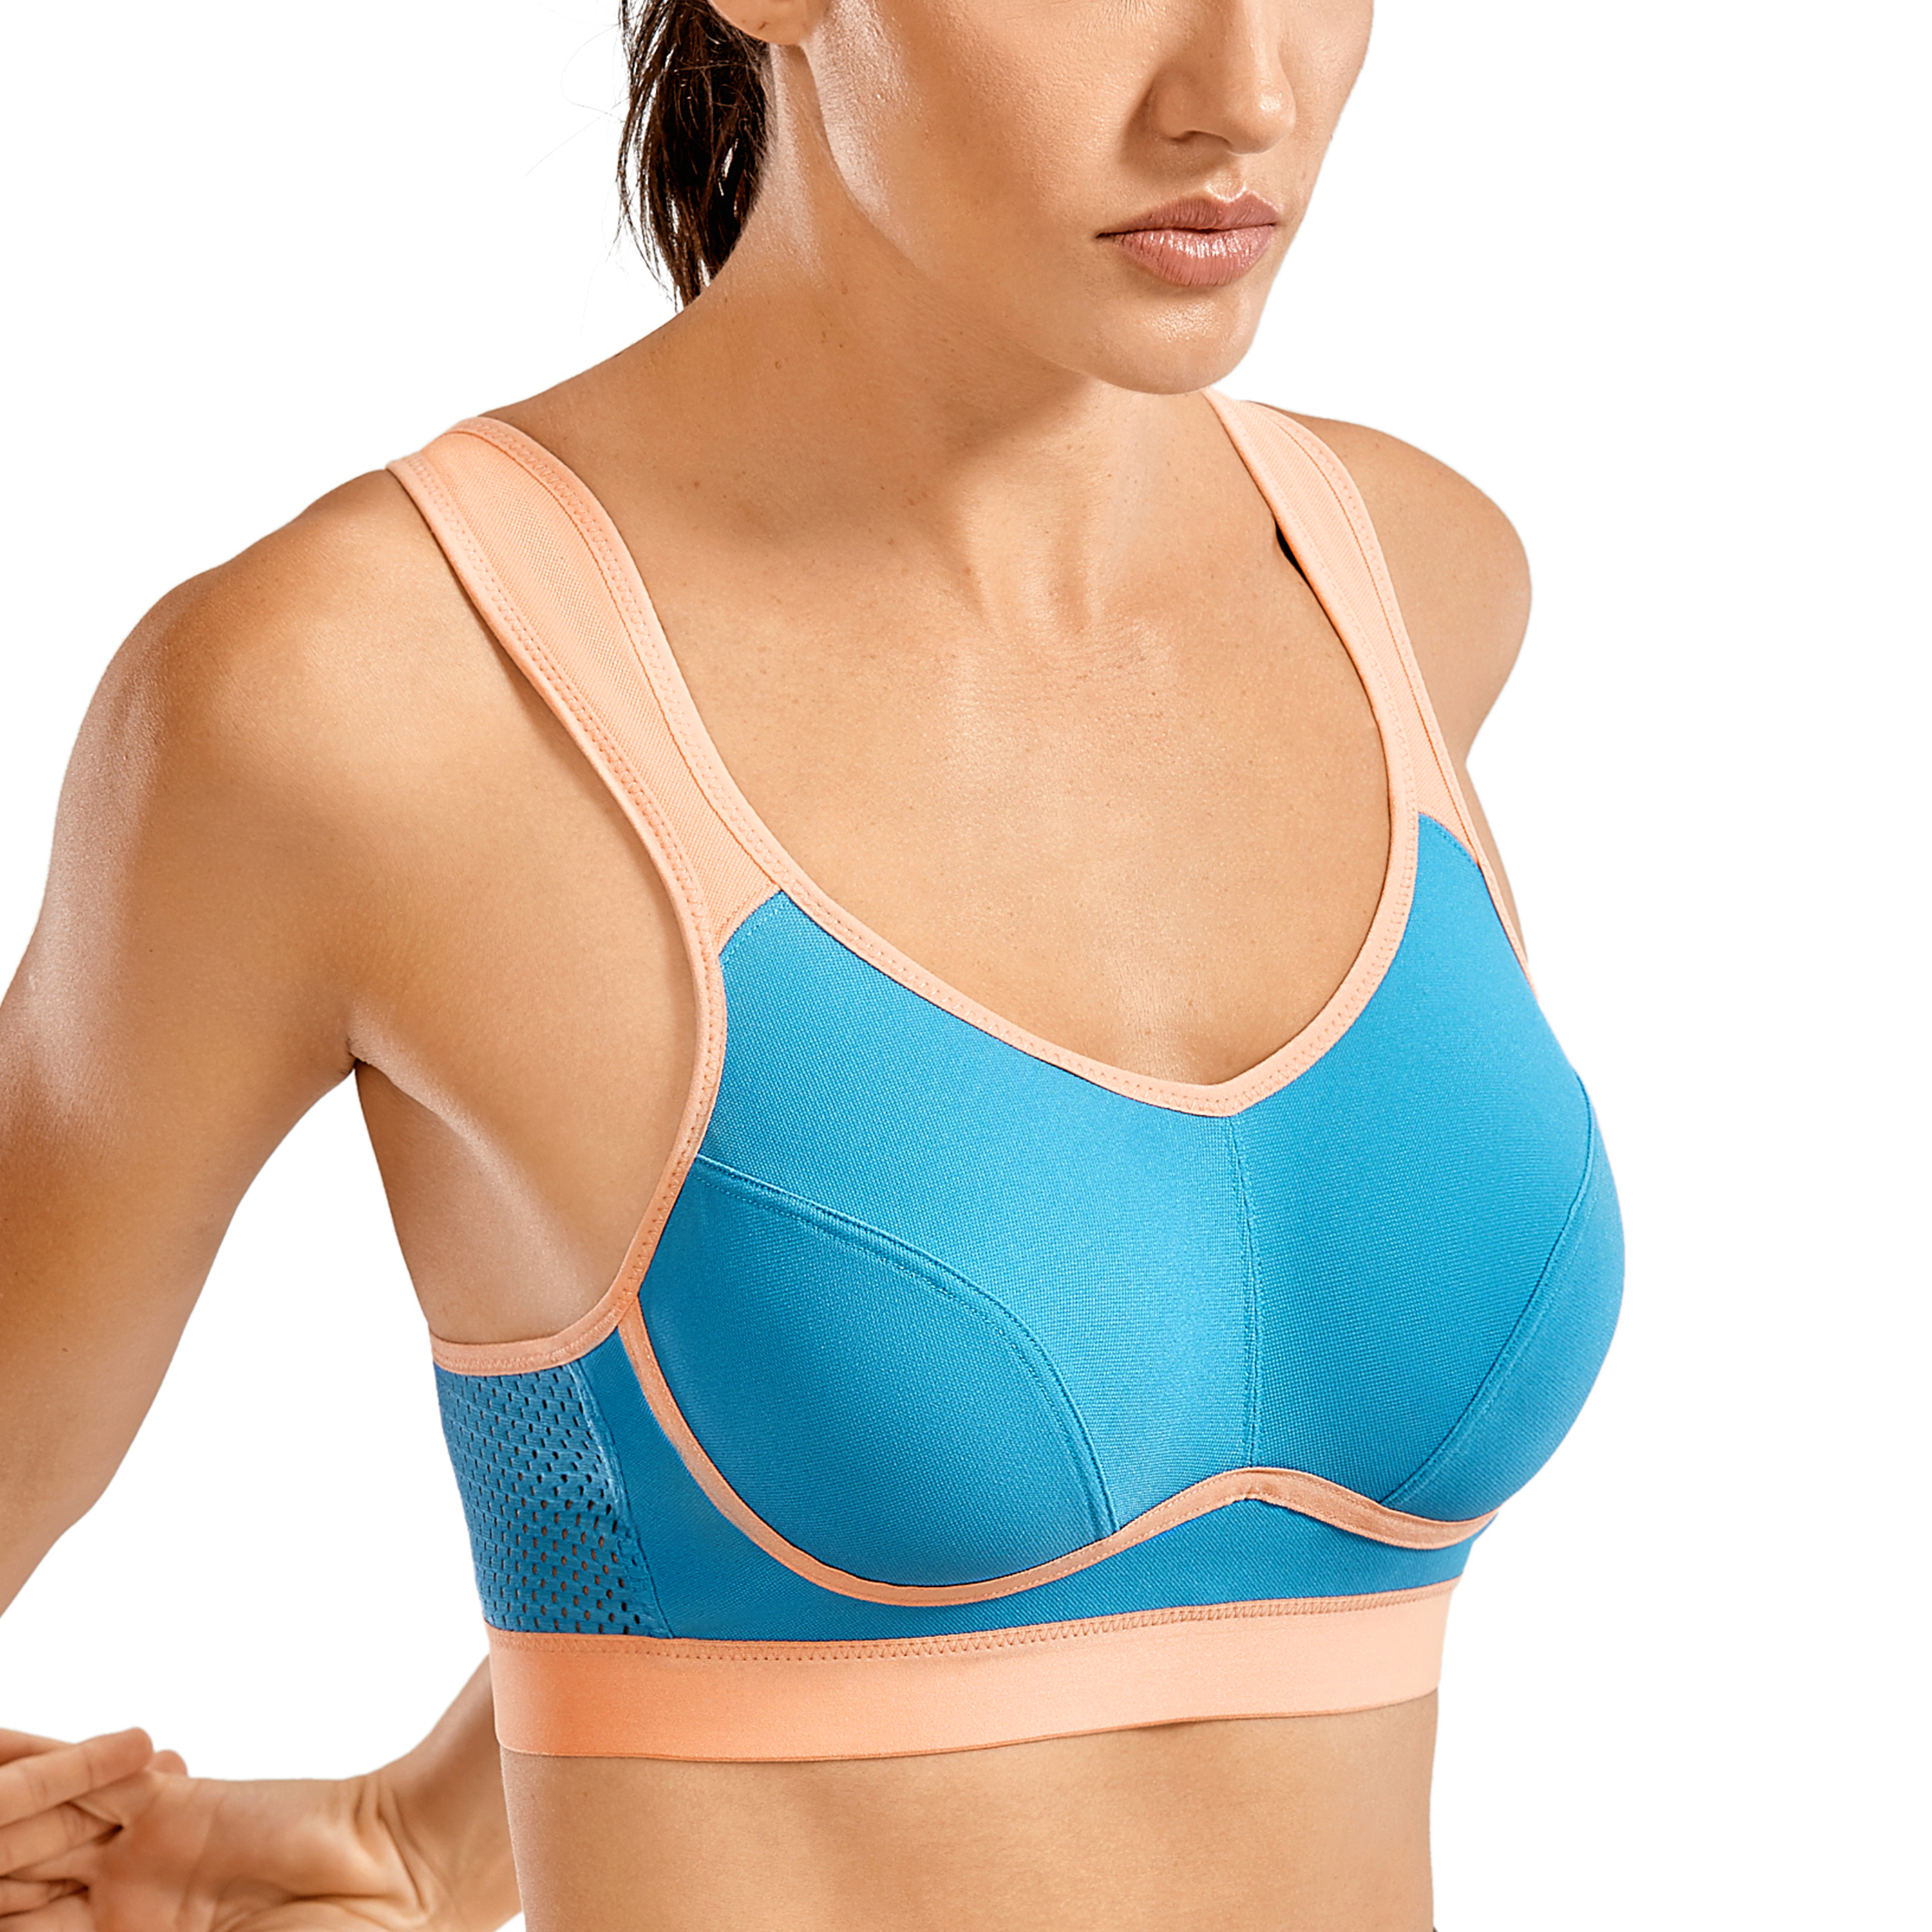 Women's Sports Bra High Impact Support Wirefree Plus Size Bounce Control  Workout | eBay